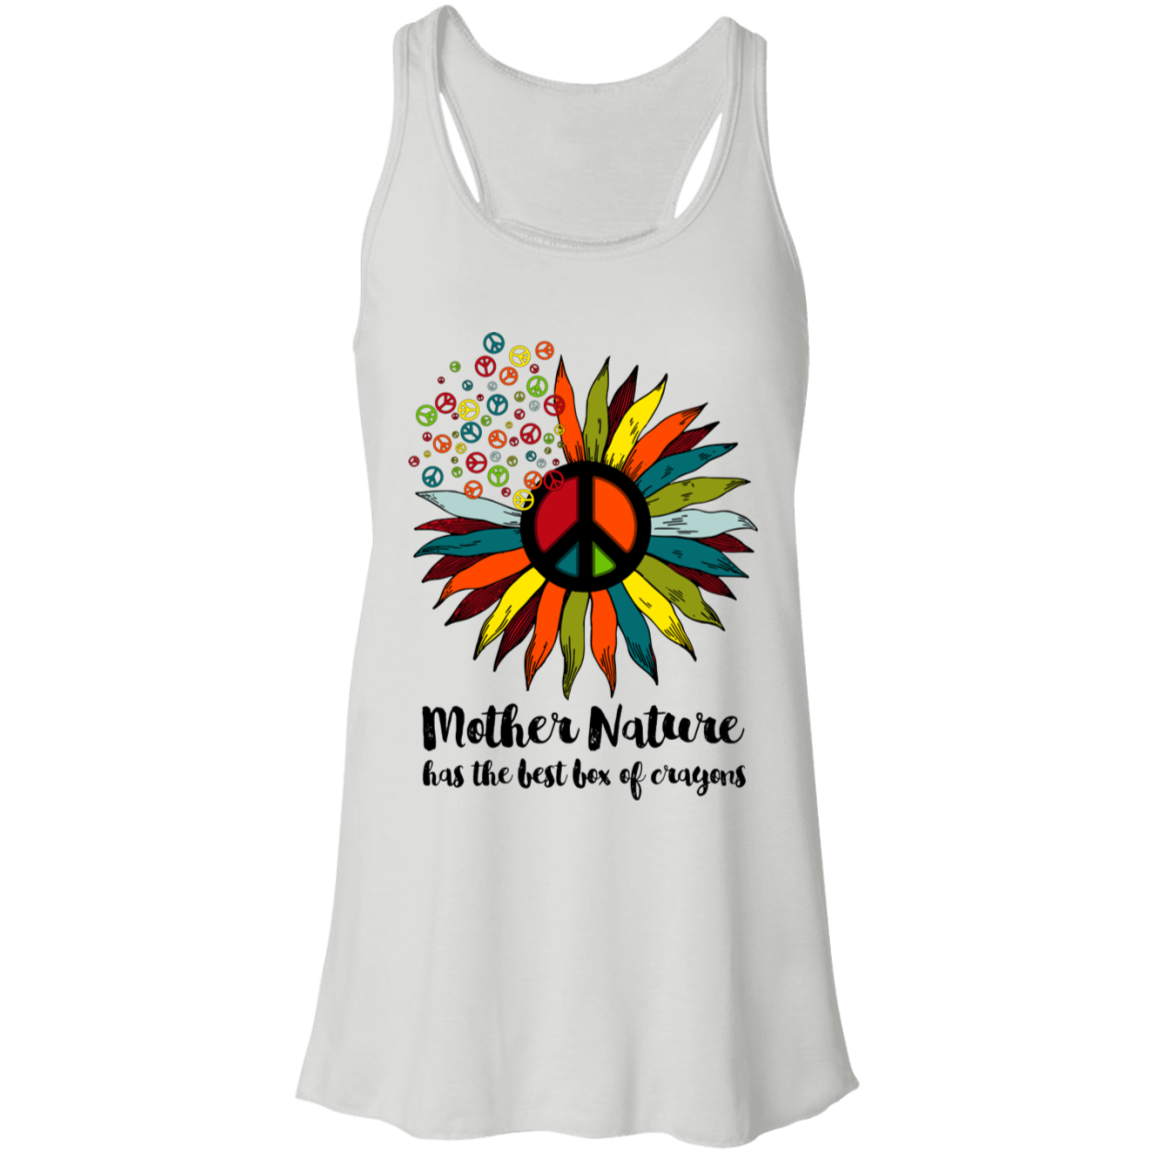 Pretty Mother Nature Flowy Racerback Ladies Tank Top for Gardening Lovers.